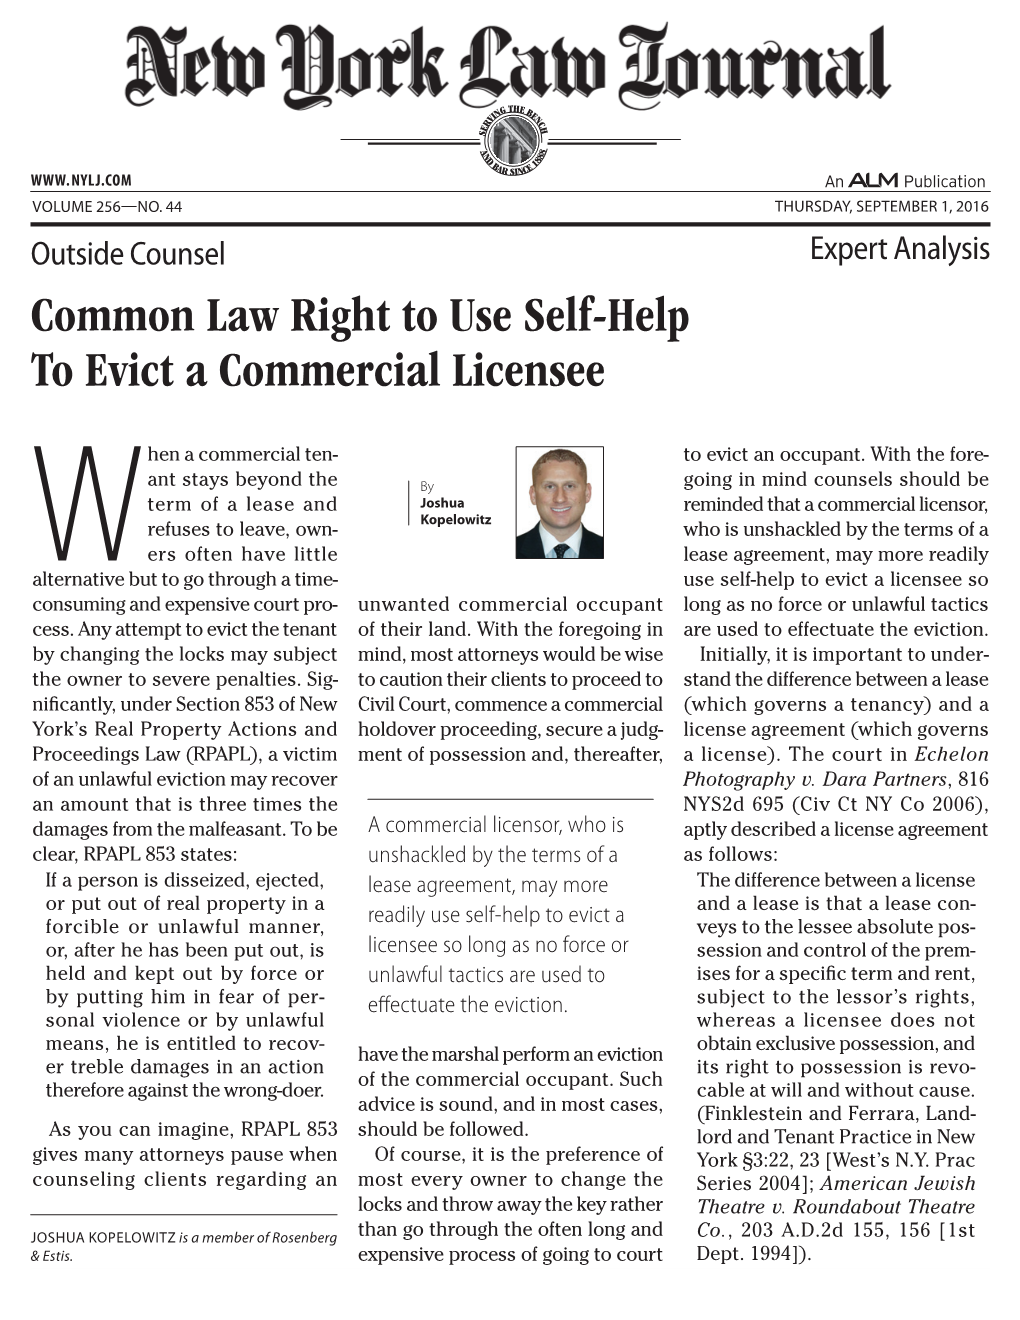 Common Law Right to Use Self-Help to Evict a Commercial Licensee